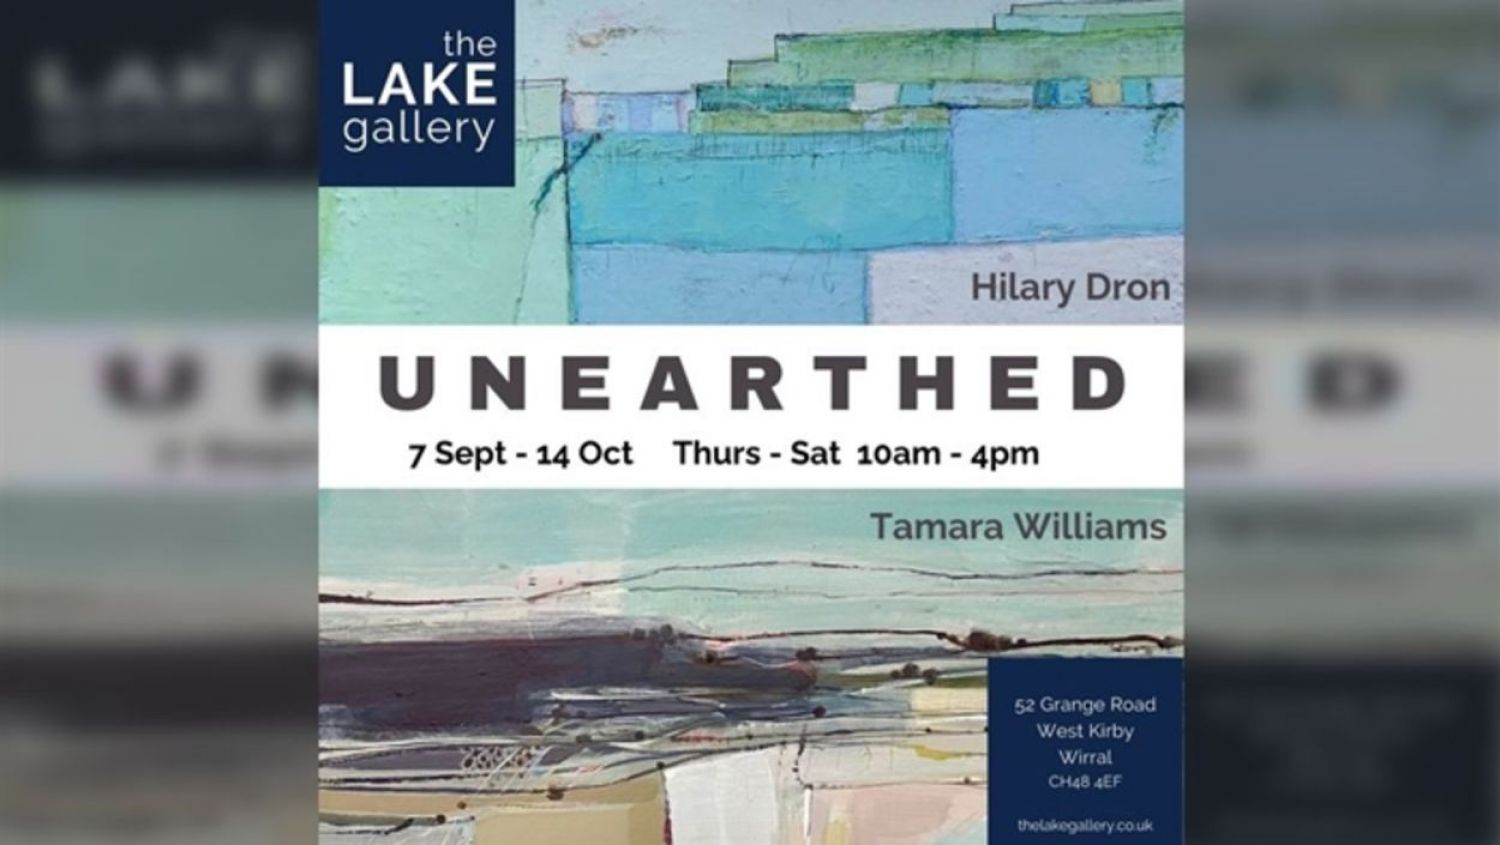 Unearthed exhibition